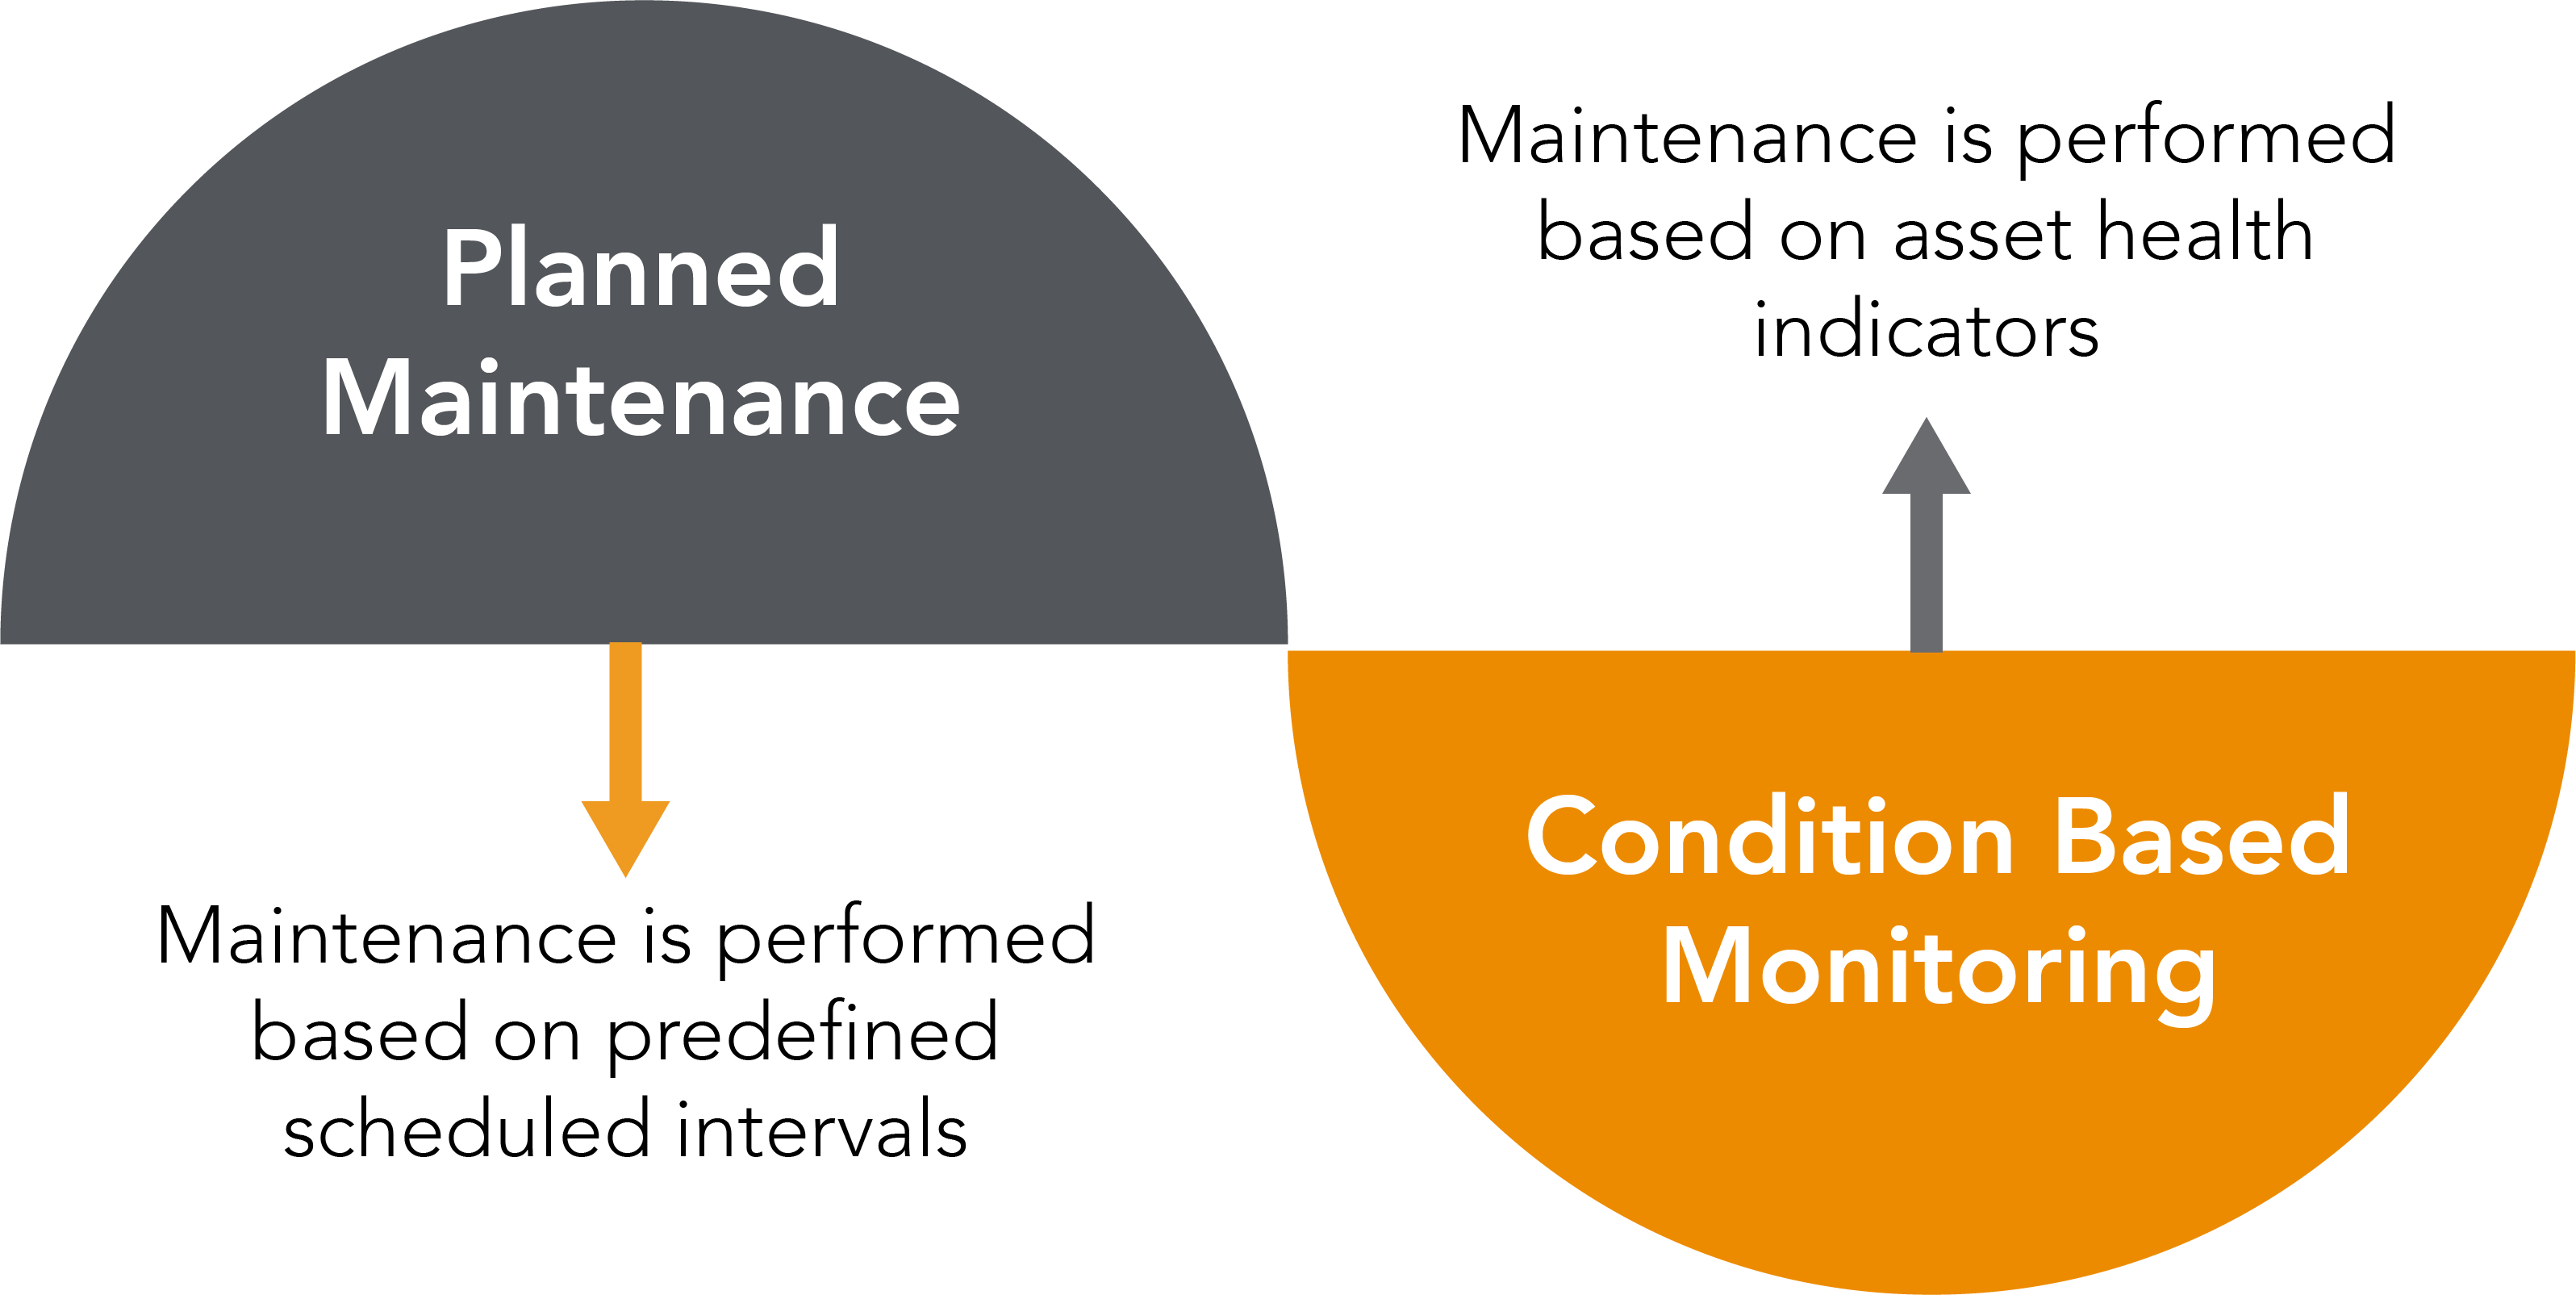 Condition Based Monitoring